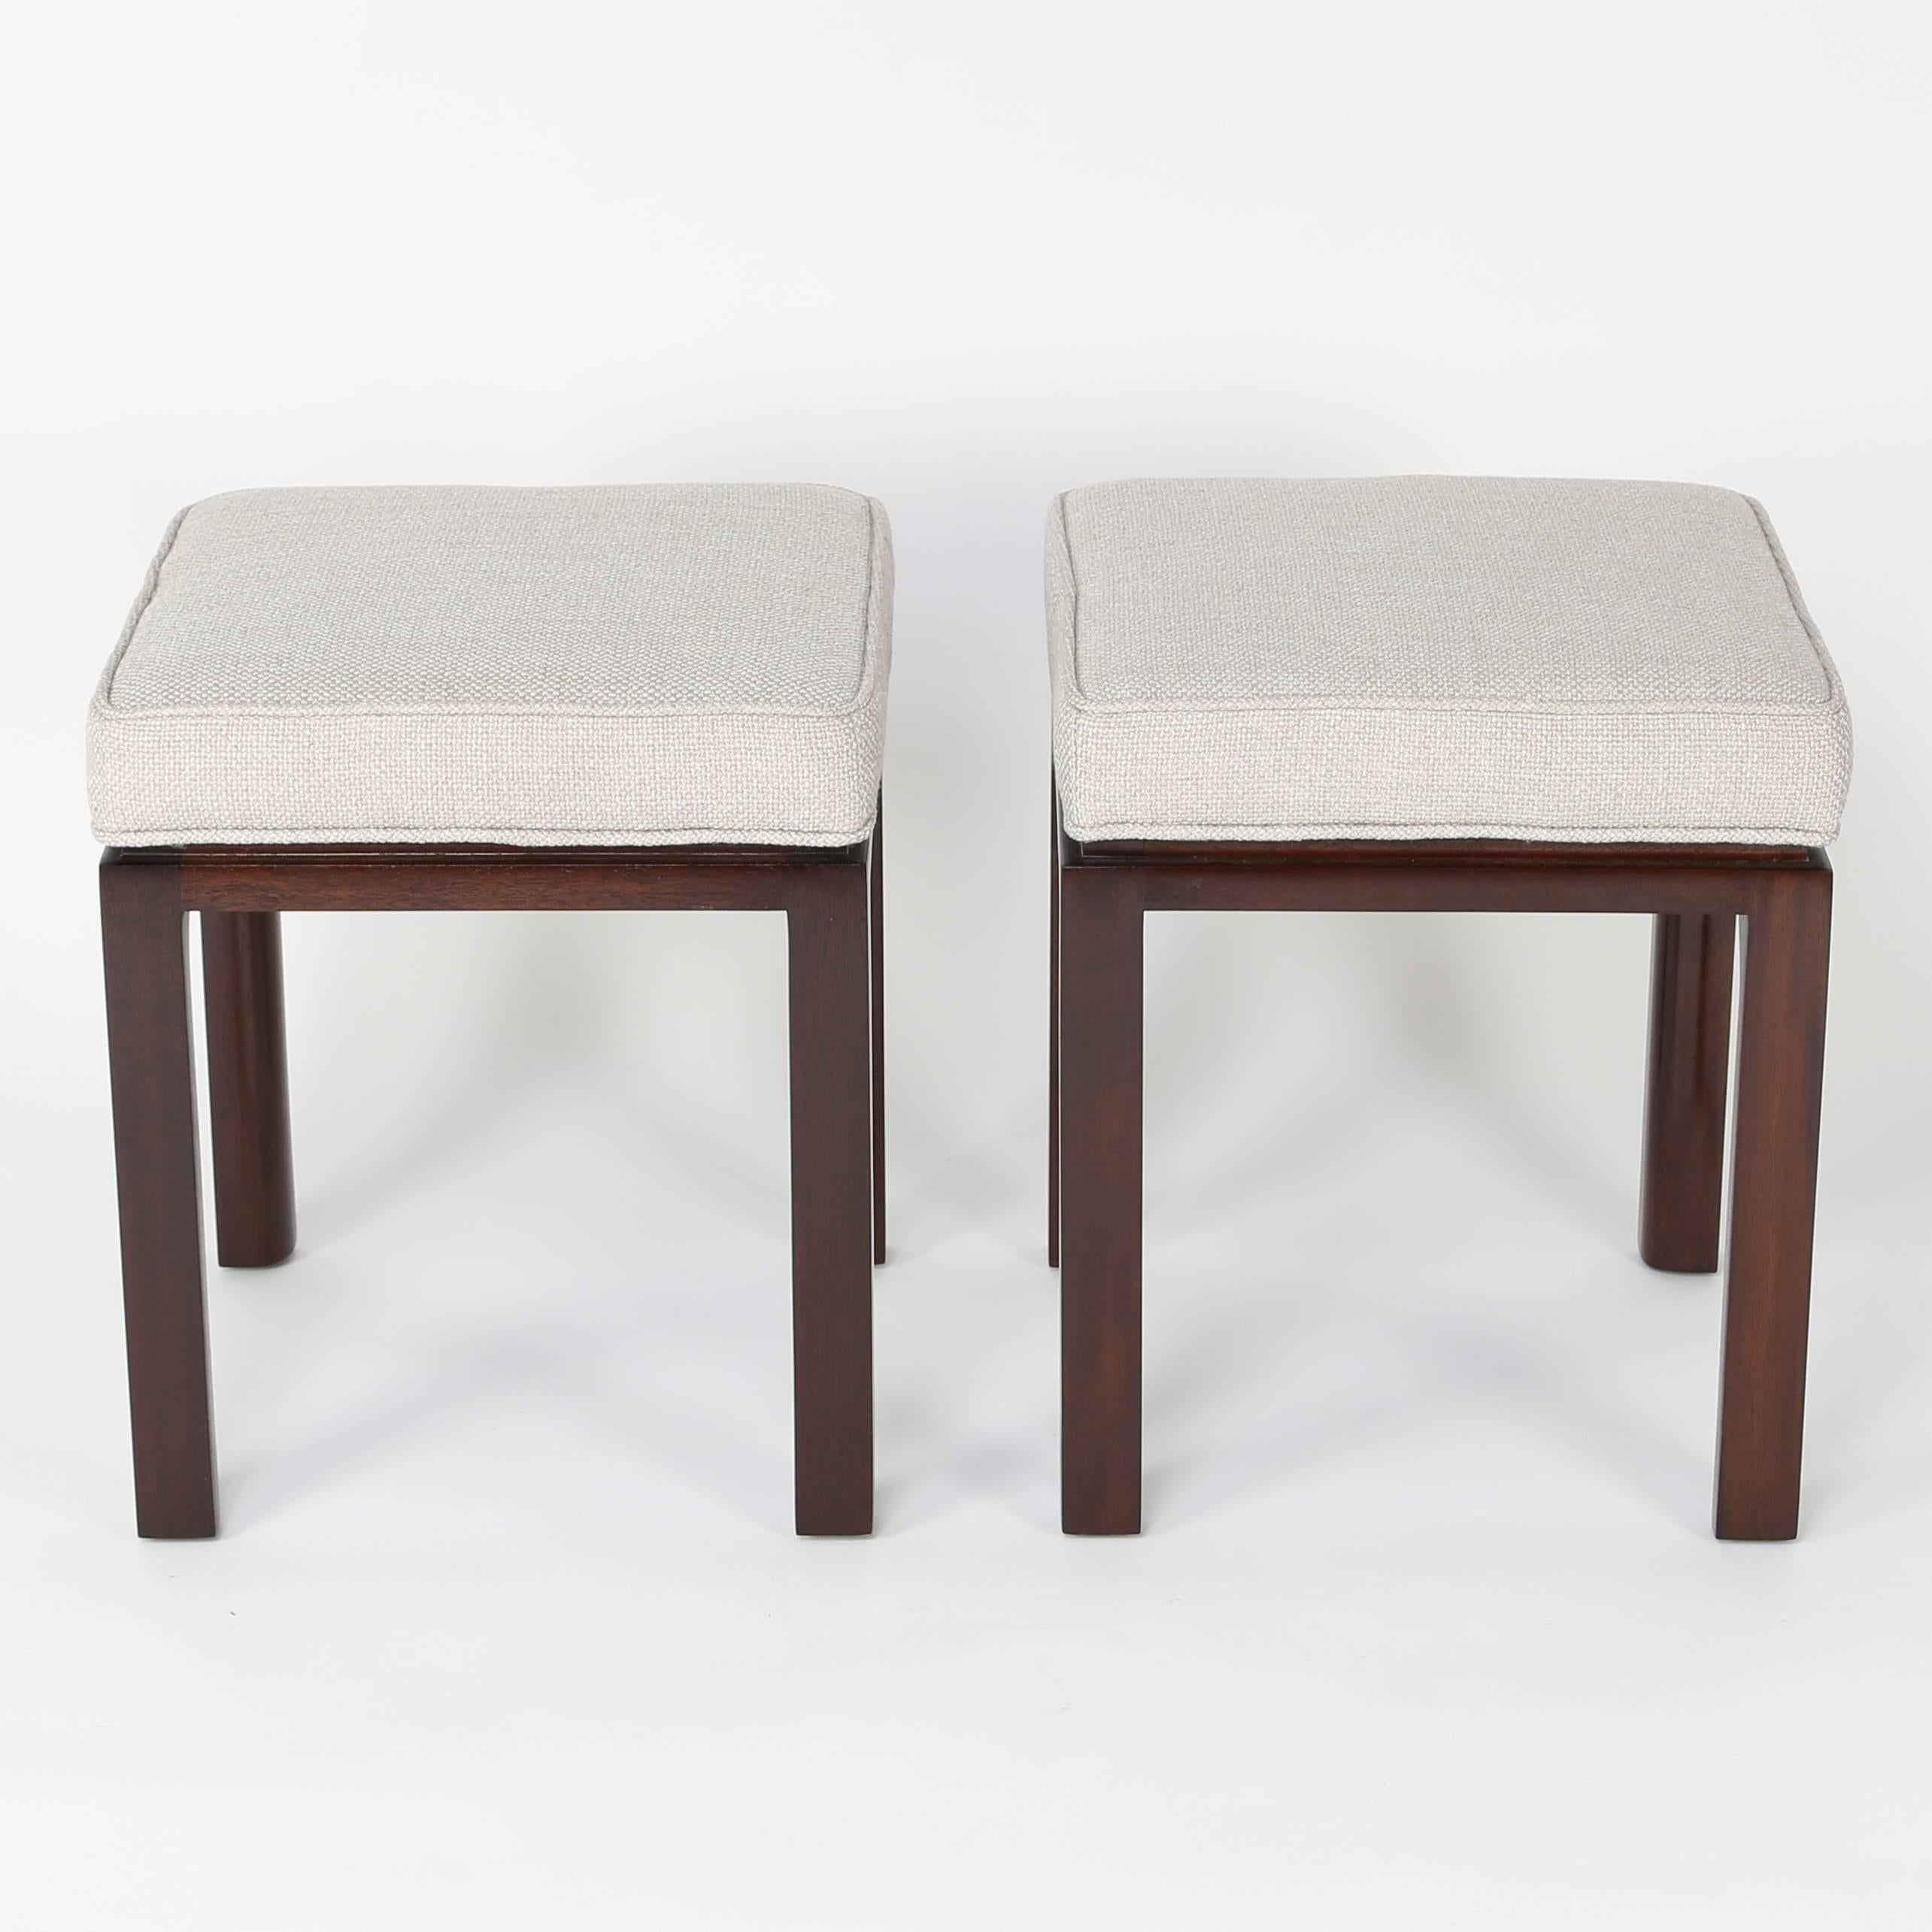 American Two Harvey Probber Stools - Four Available, Circa 1960s